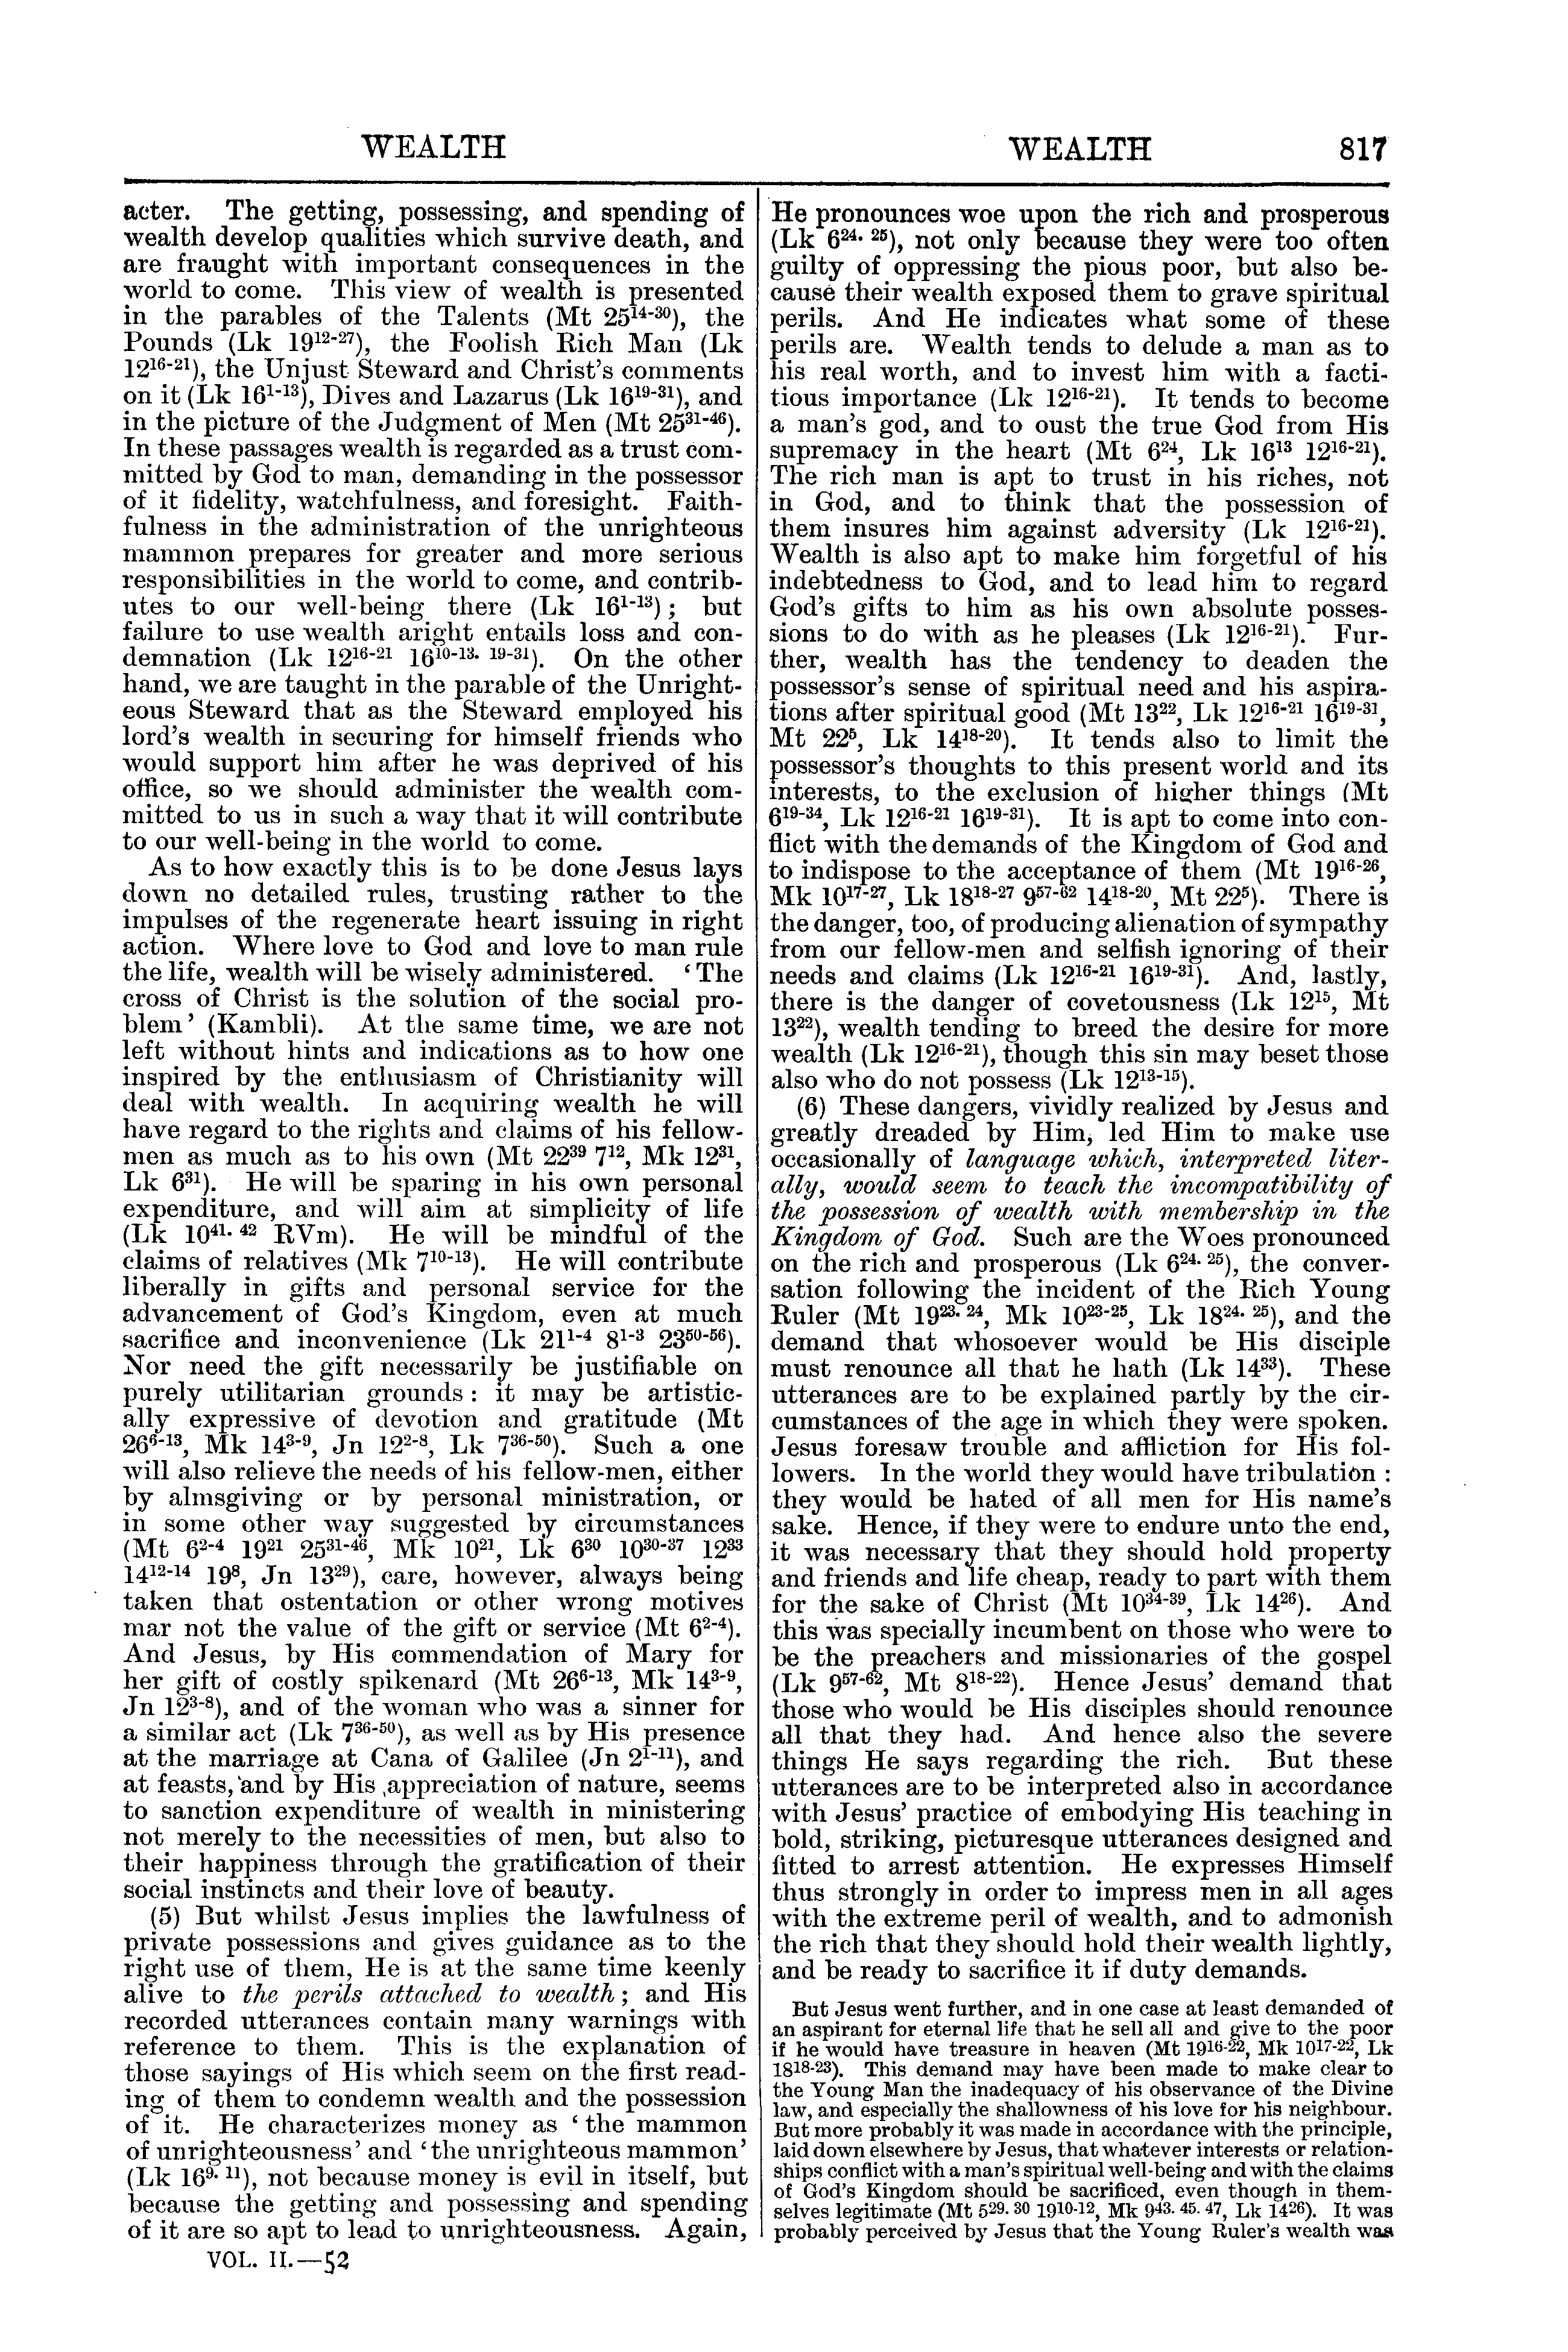 Image of page 817